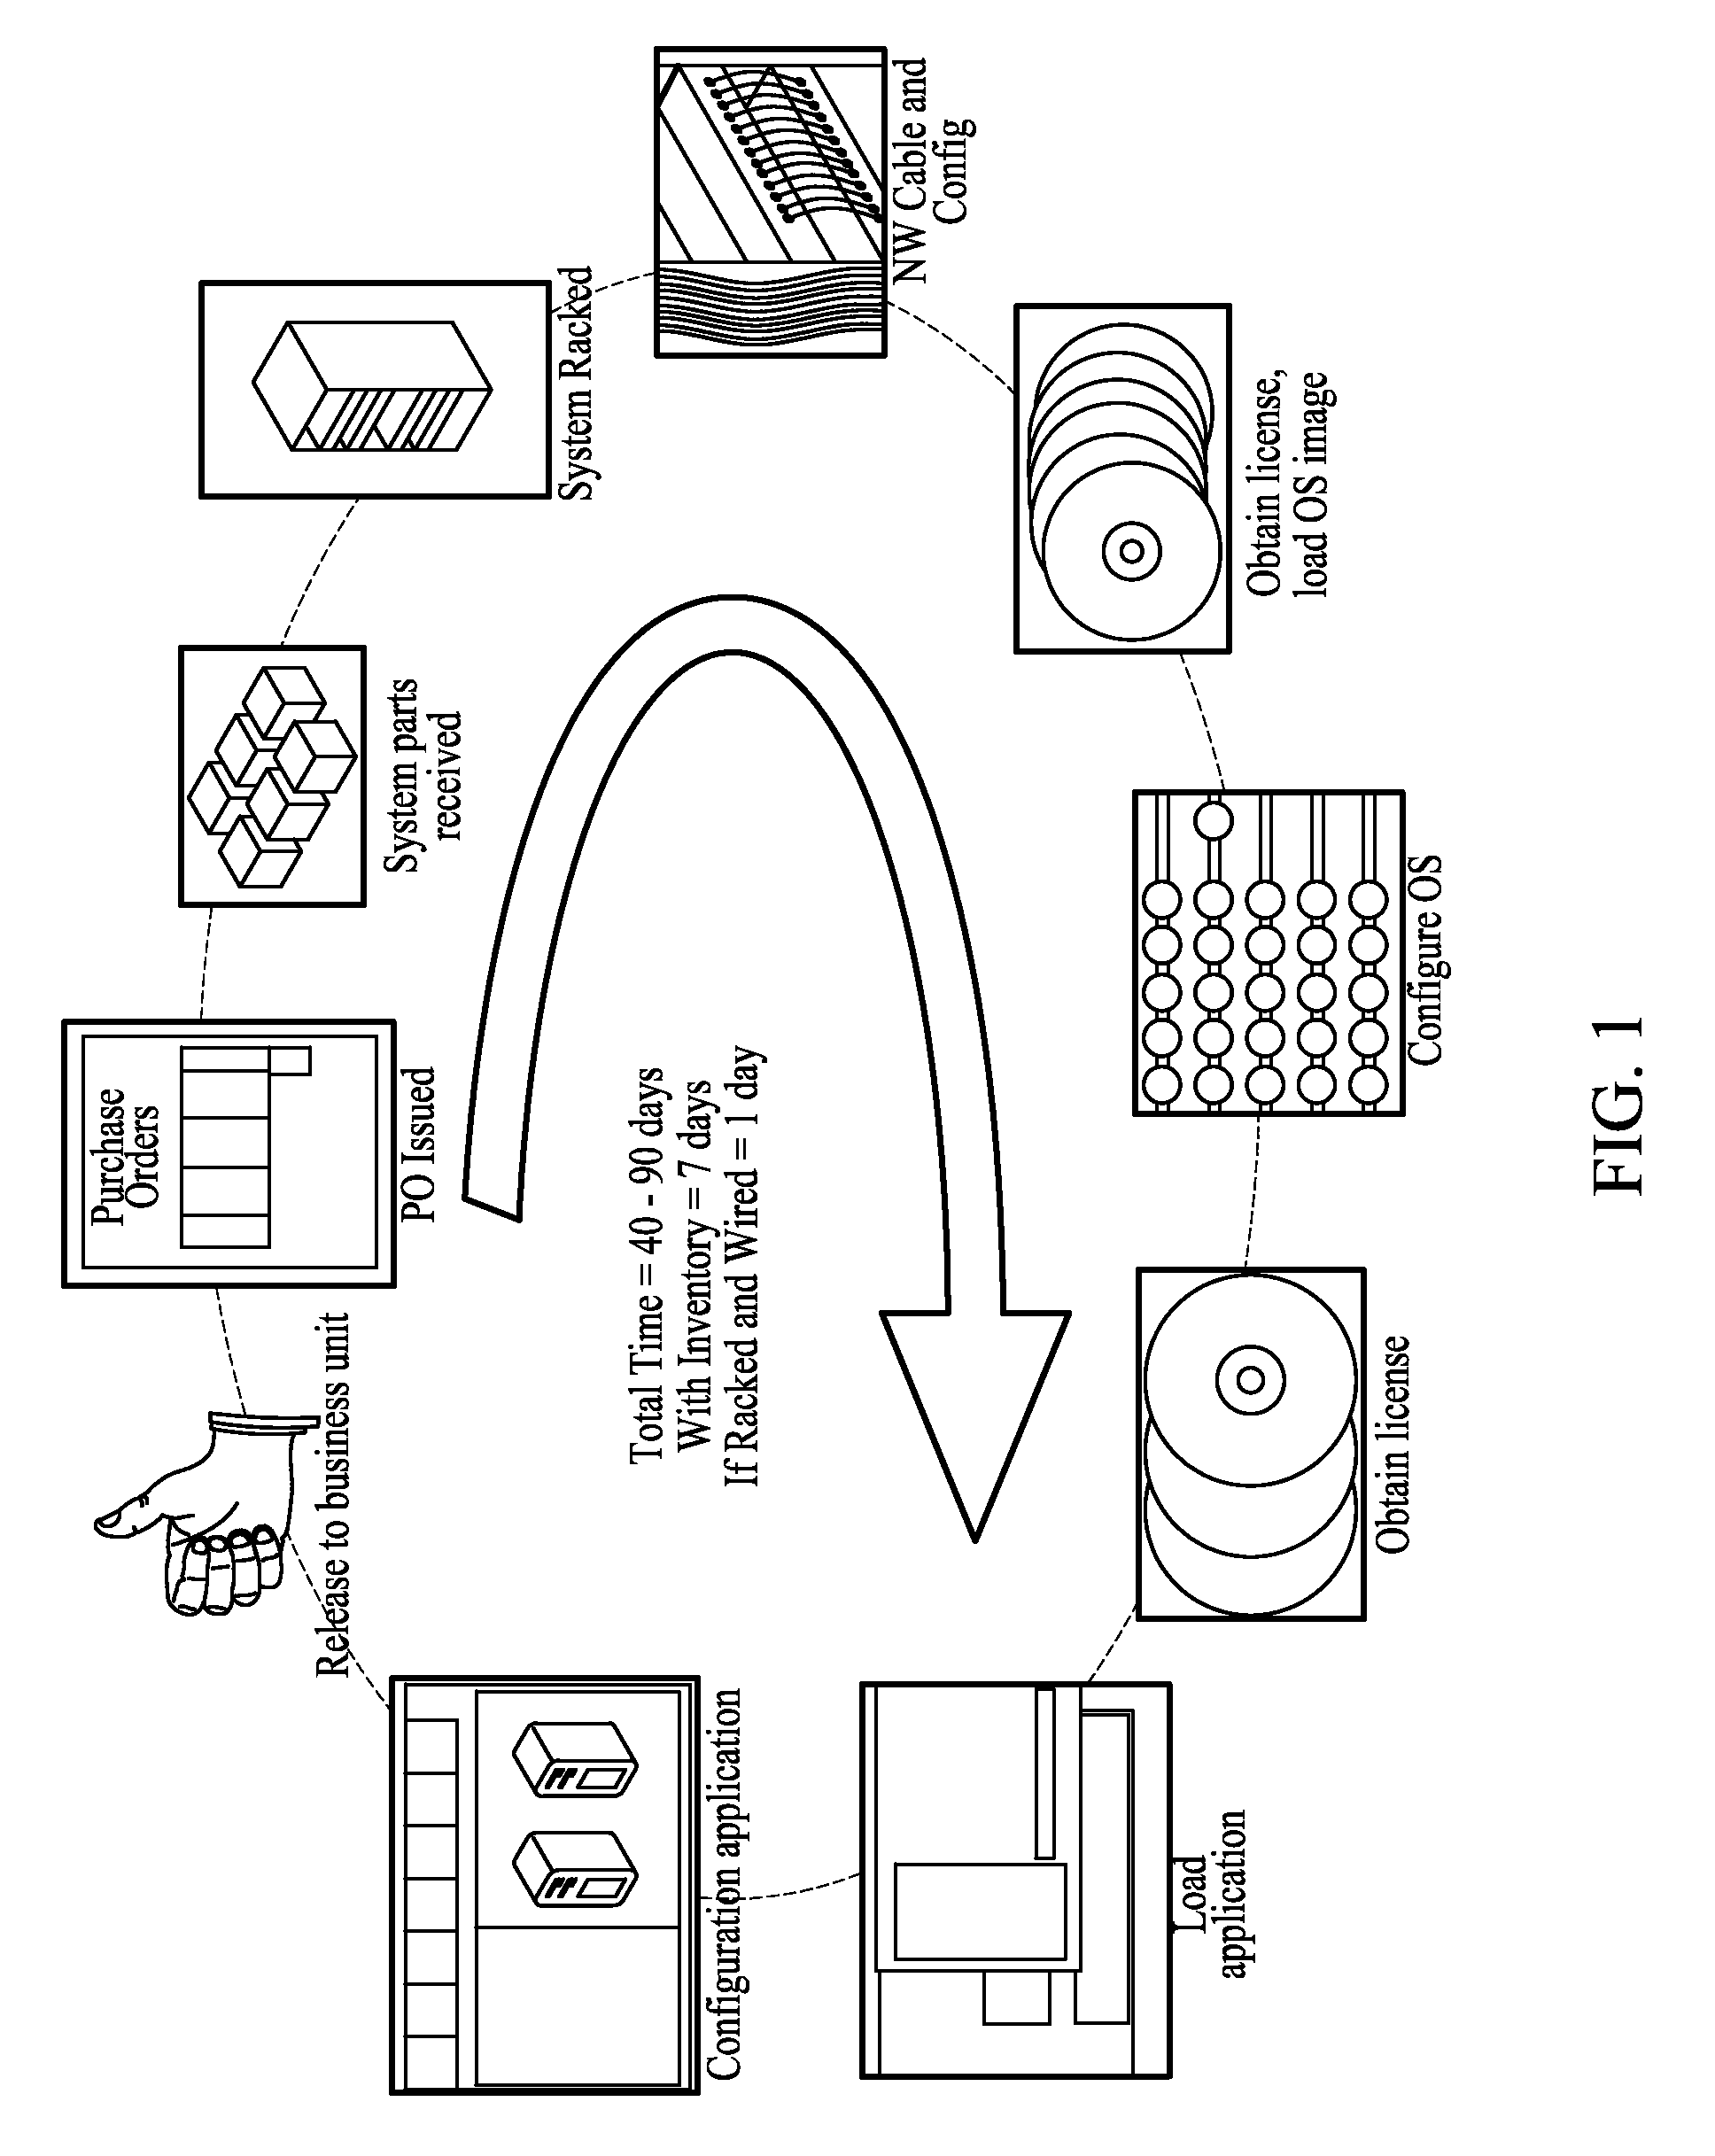 Method and remote system for creating a customized server infrastructure in real time